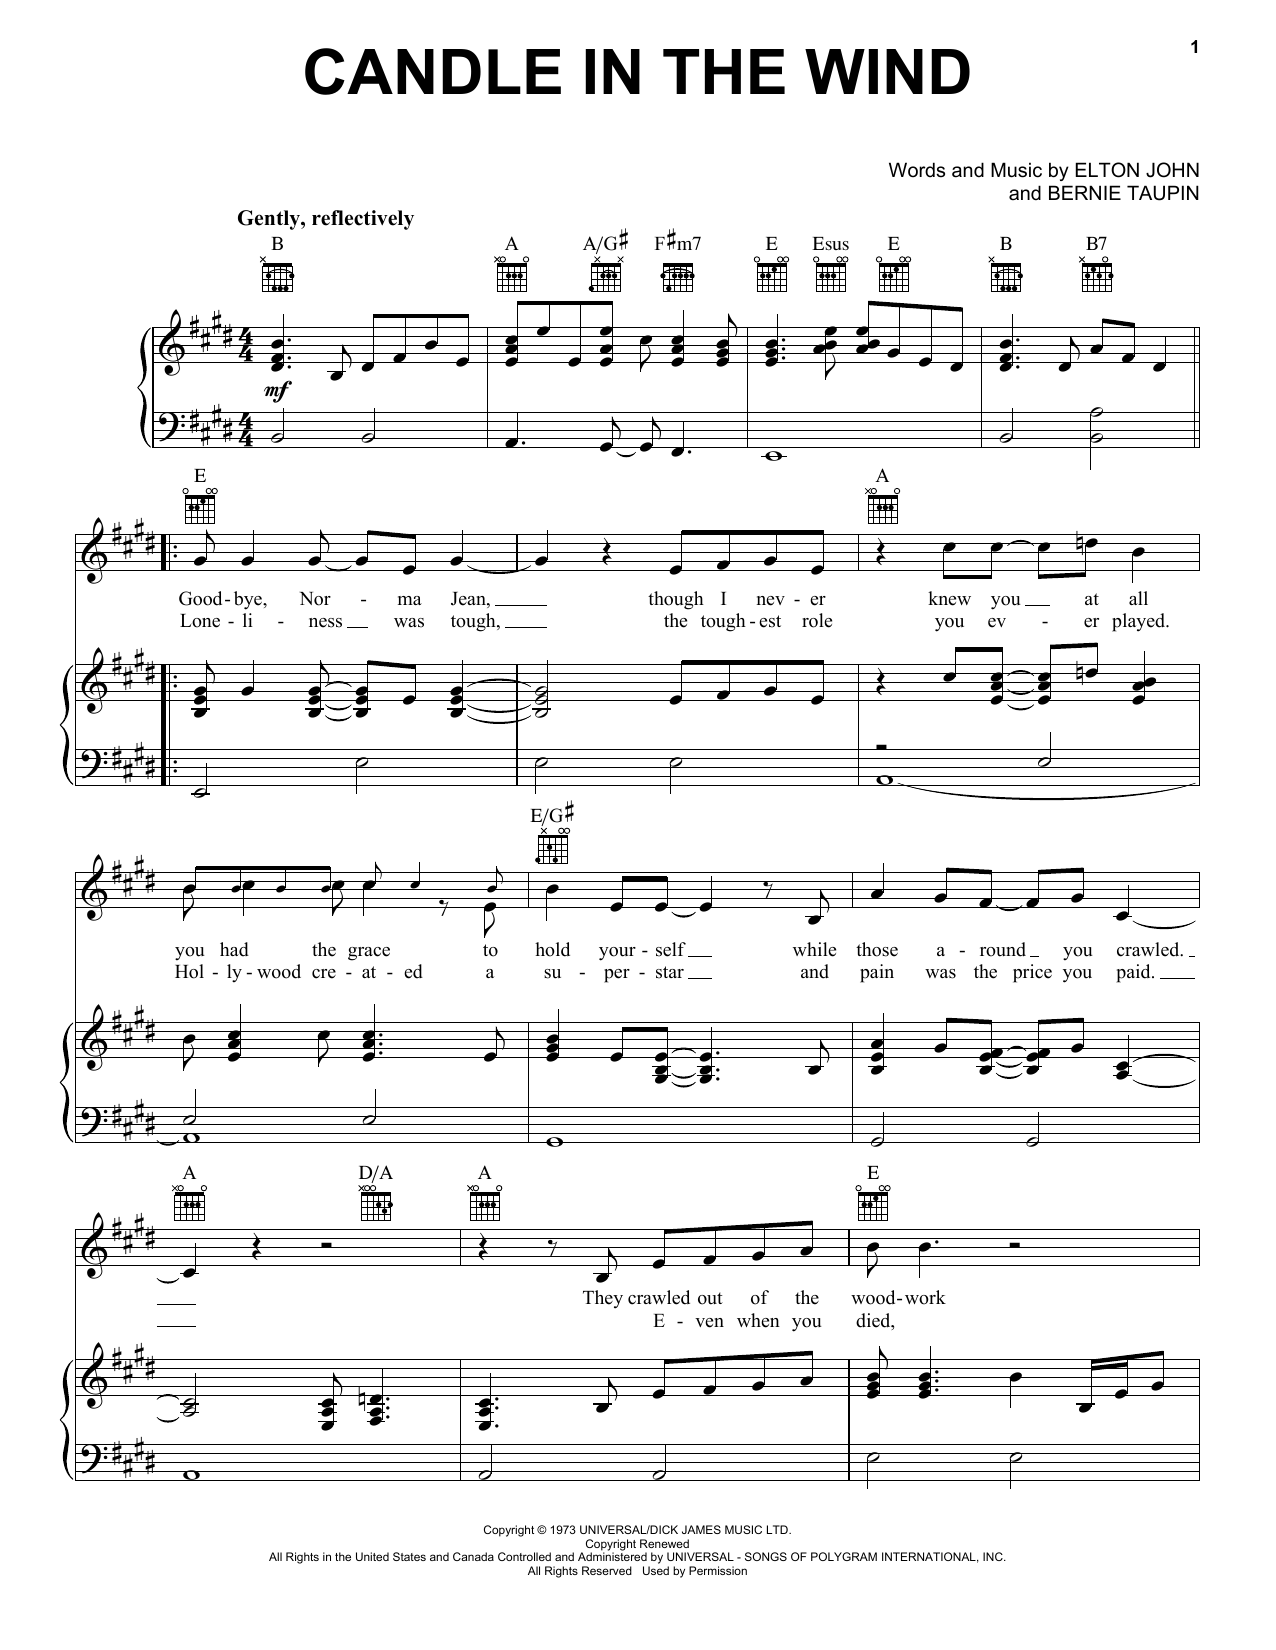 Elton John Candle In The Wind sheet music notes and chords. Download Printable PDF.